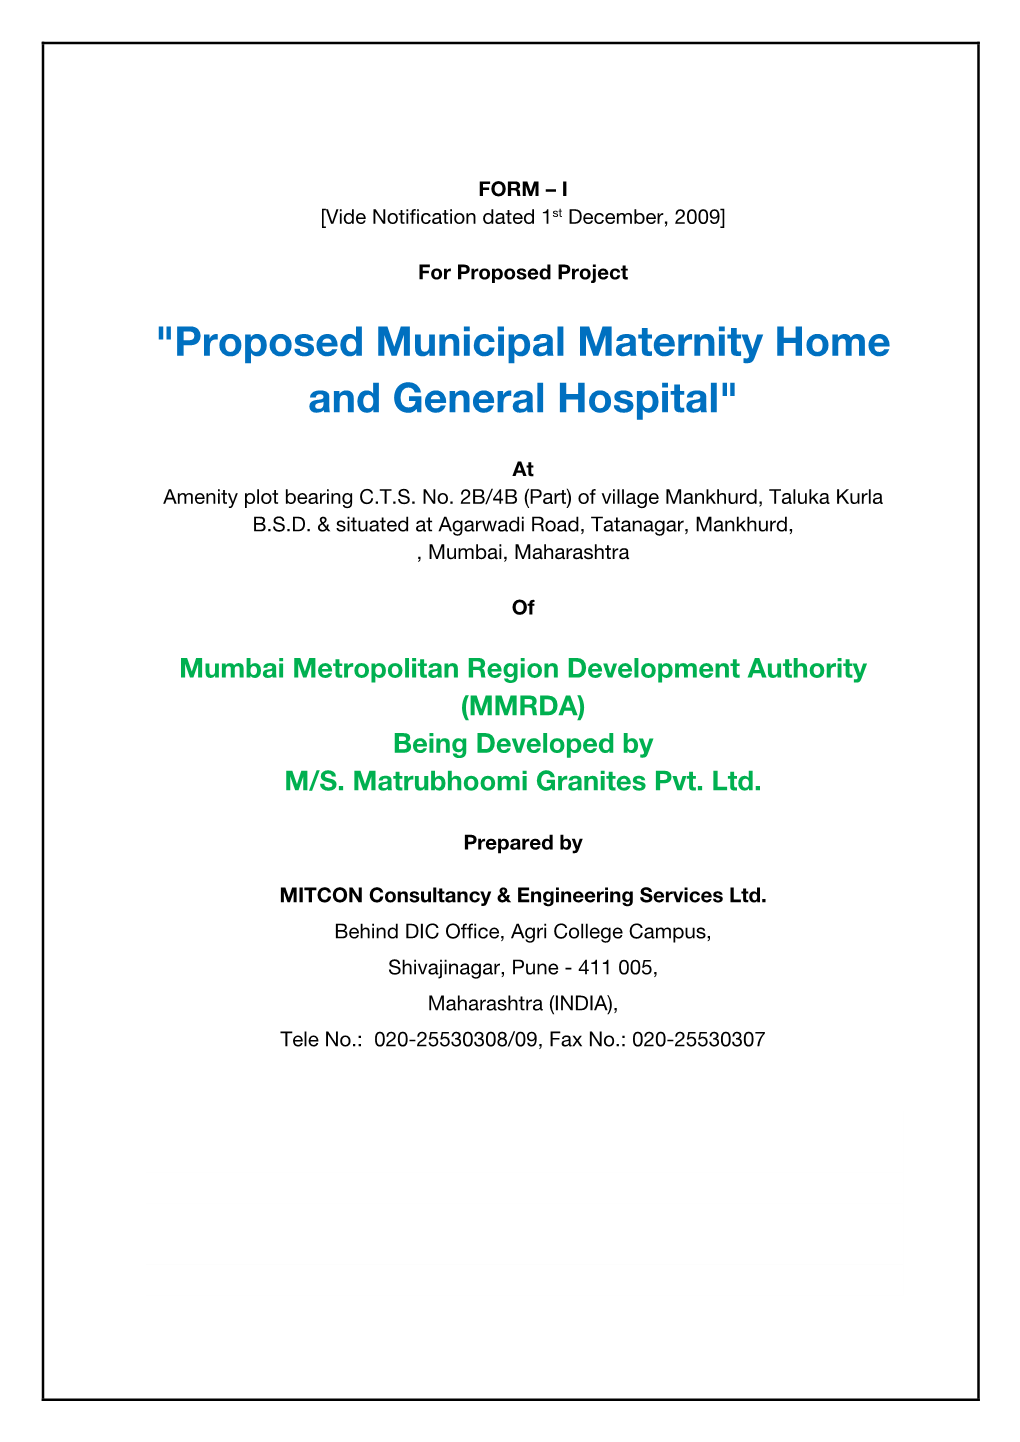 "Proposed Municipal Maternity Home and General Hospital"